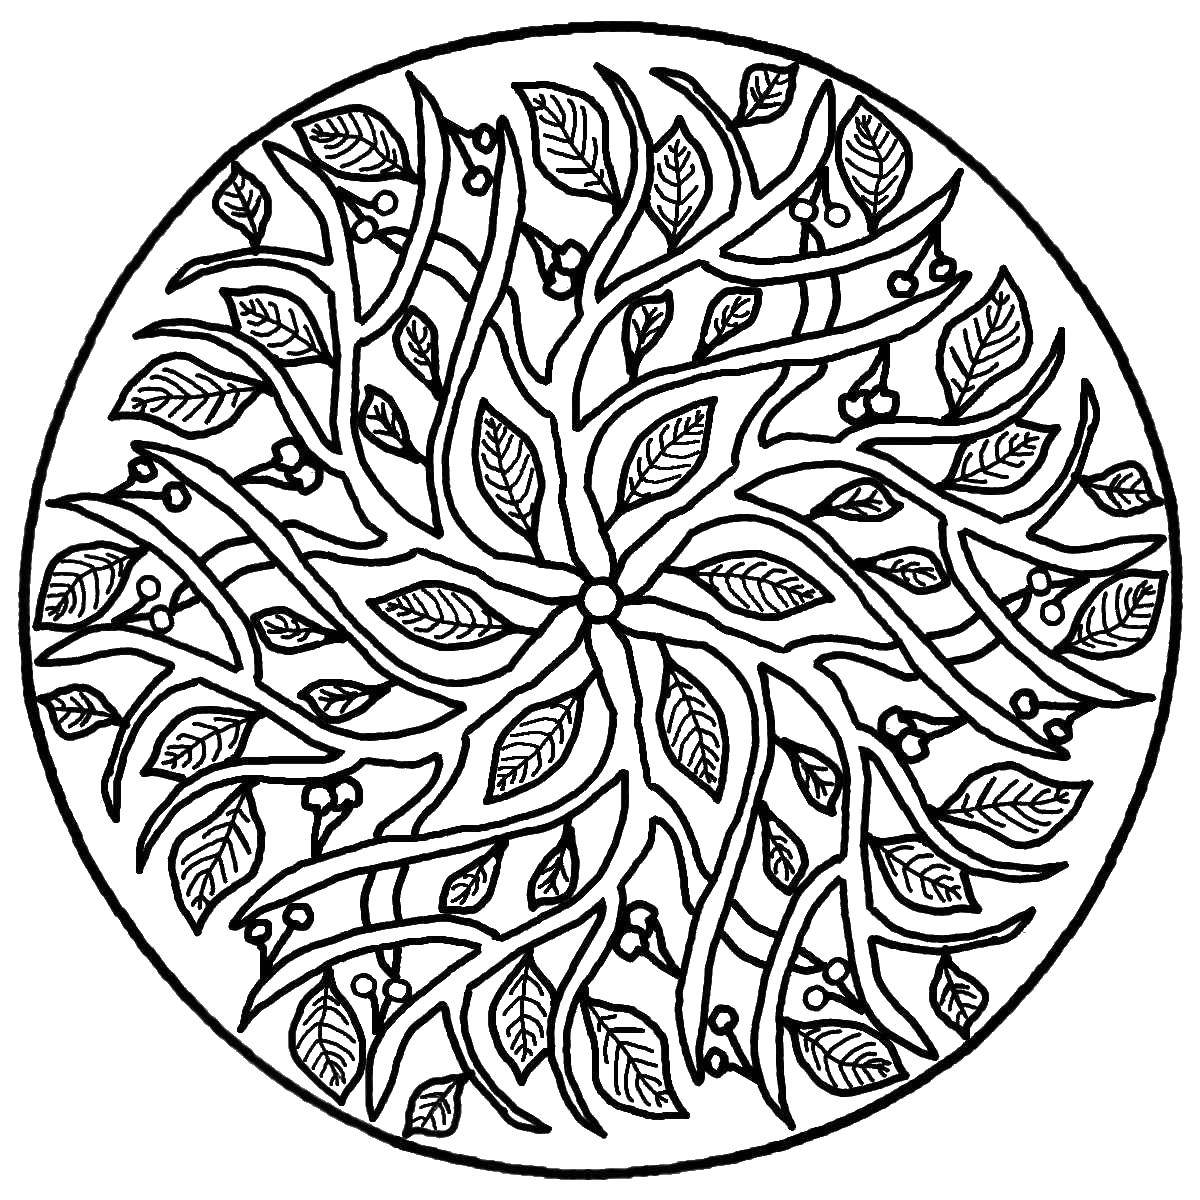 Coloring A pattern of leaves. Category patterns. Tags:  patterns, plants, leaves.